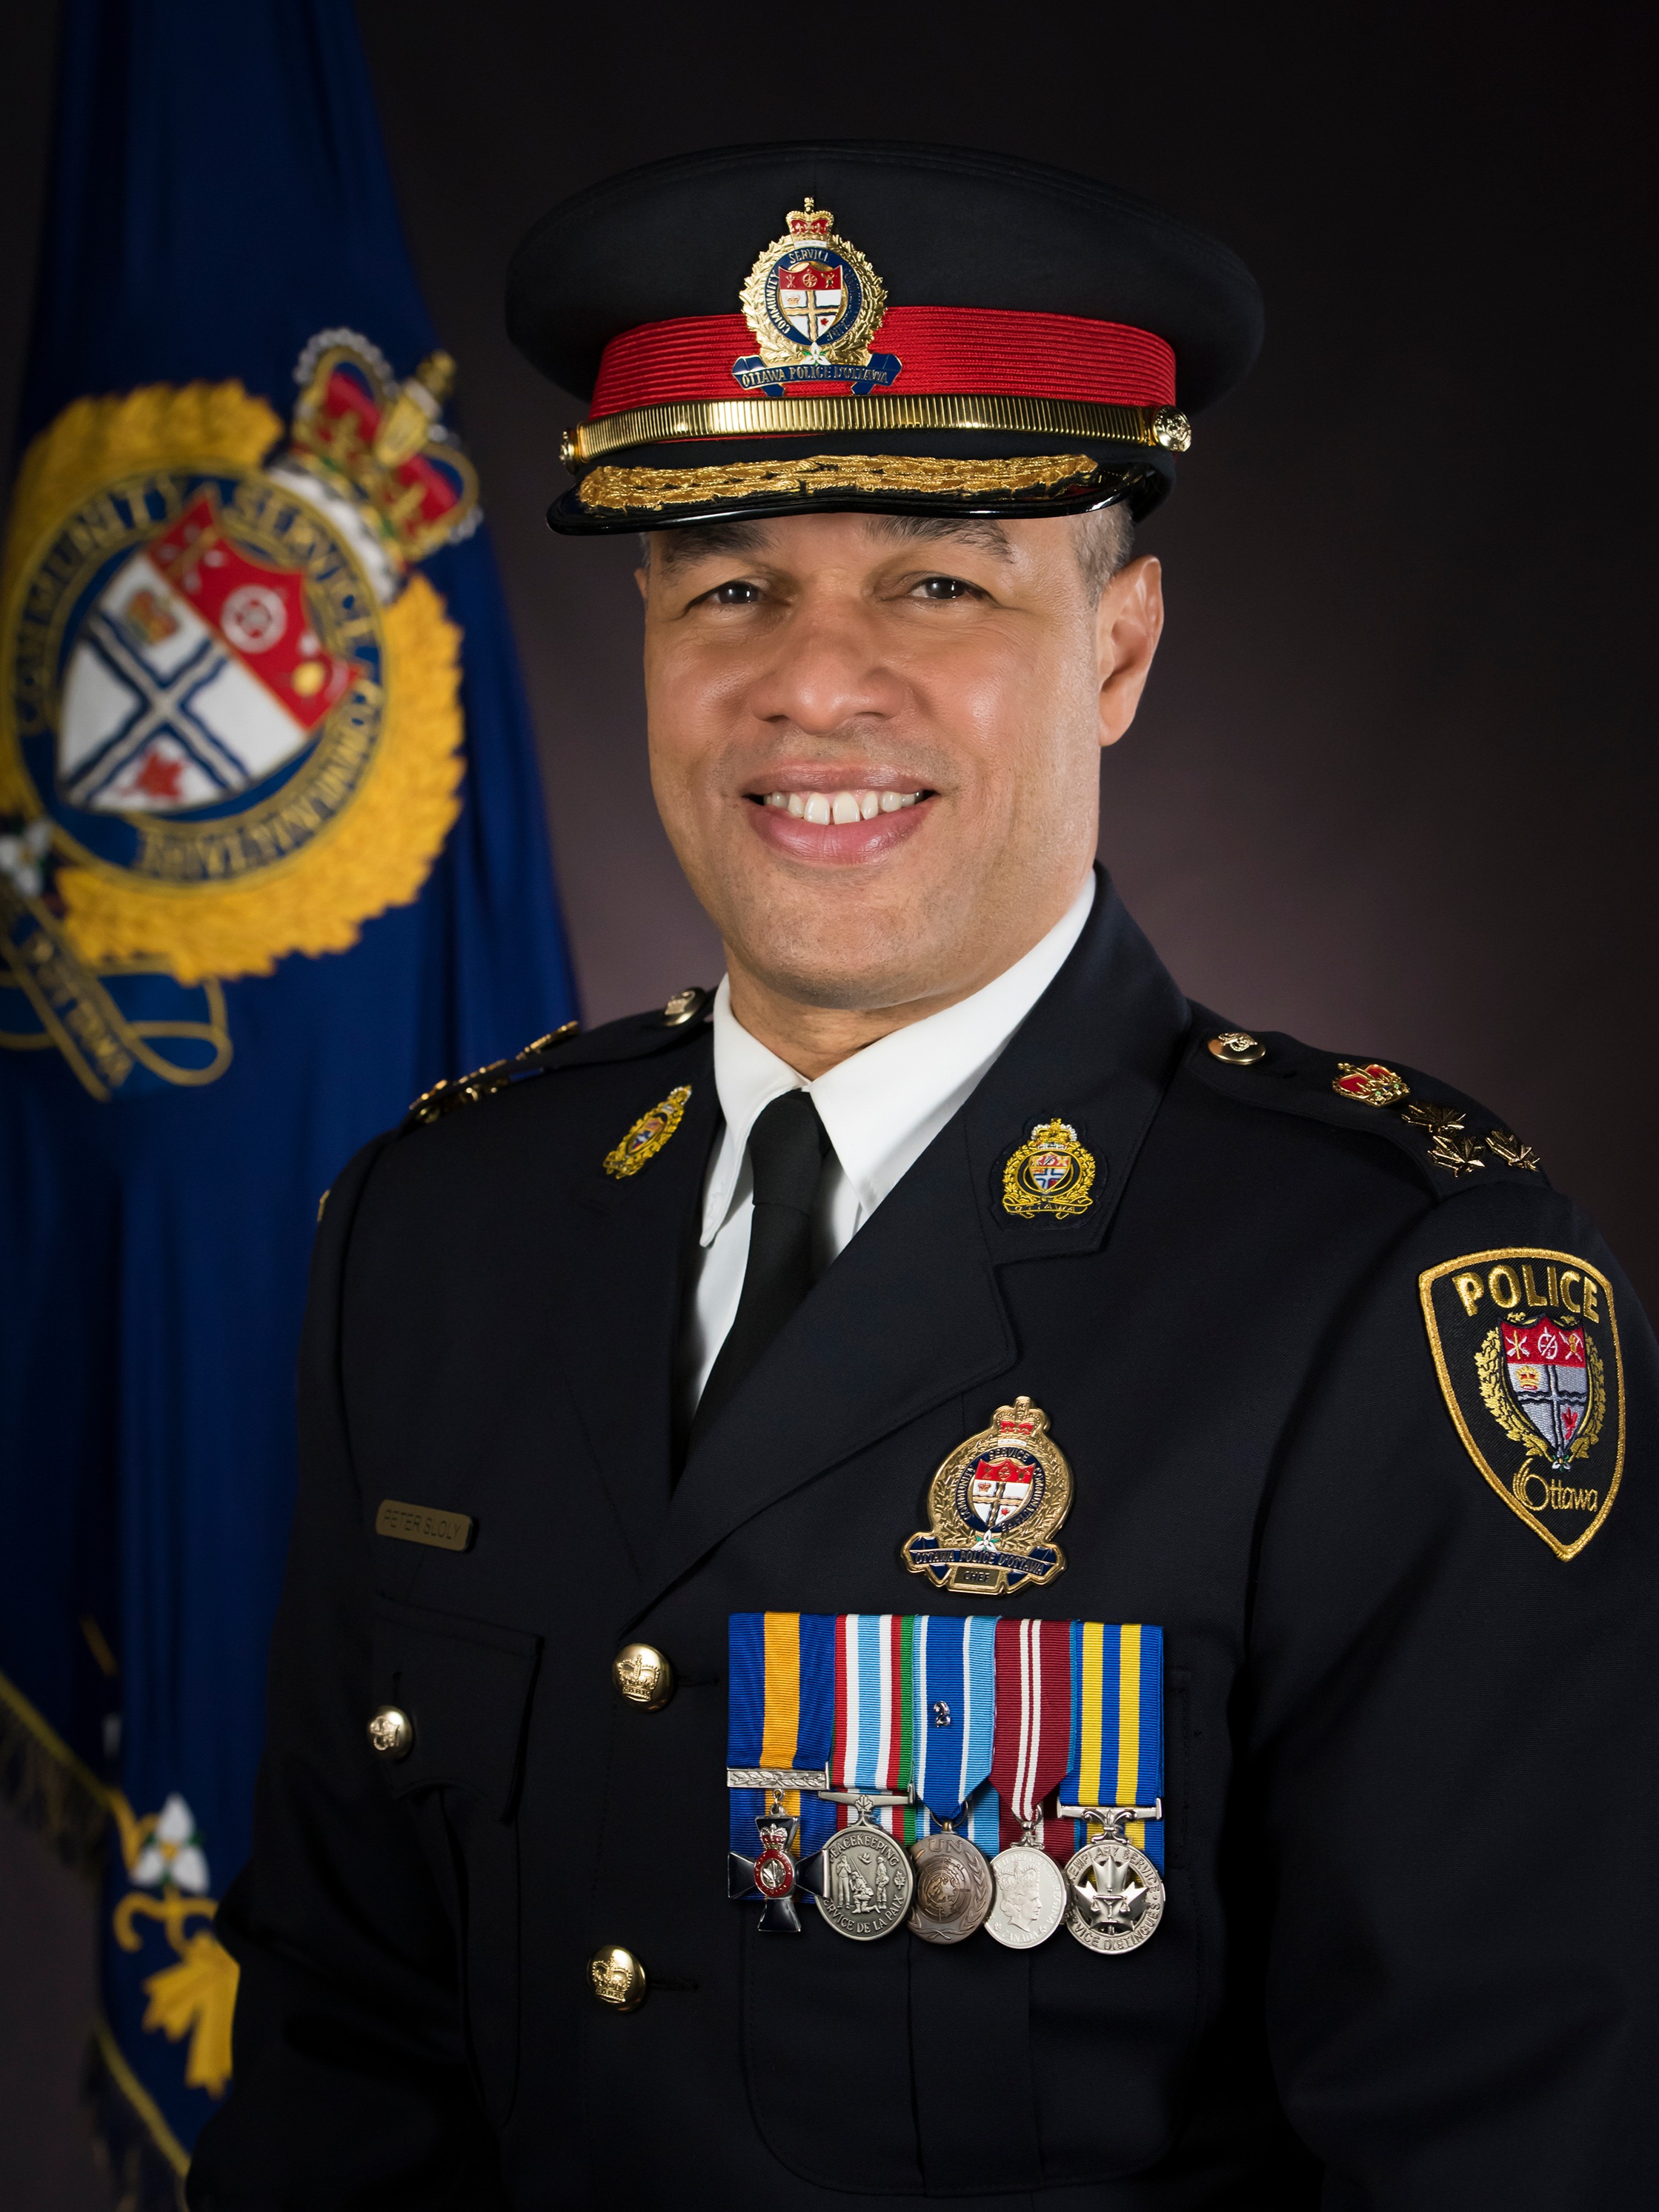 Official portrait of Ottawa police chief Peter Sloly.